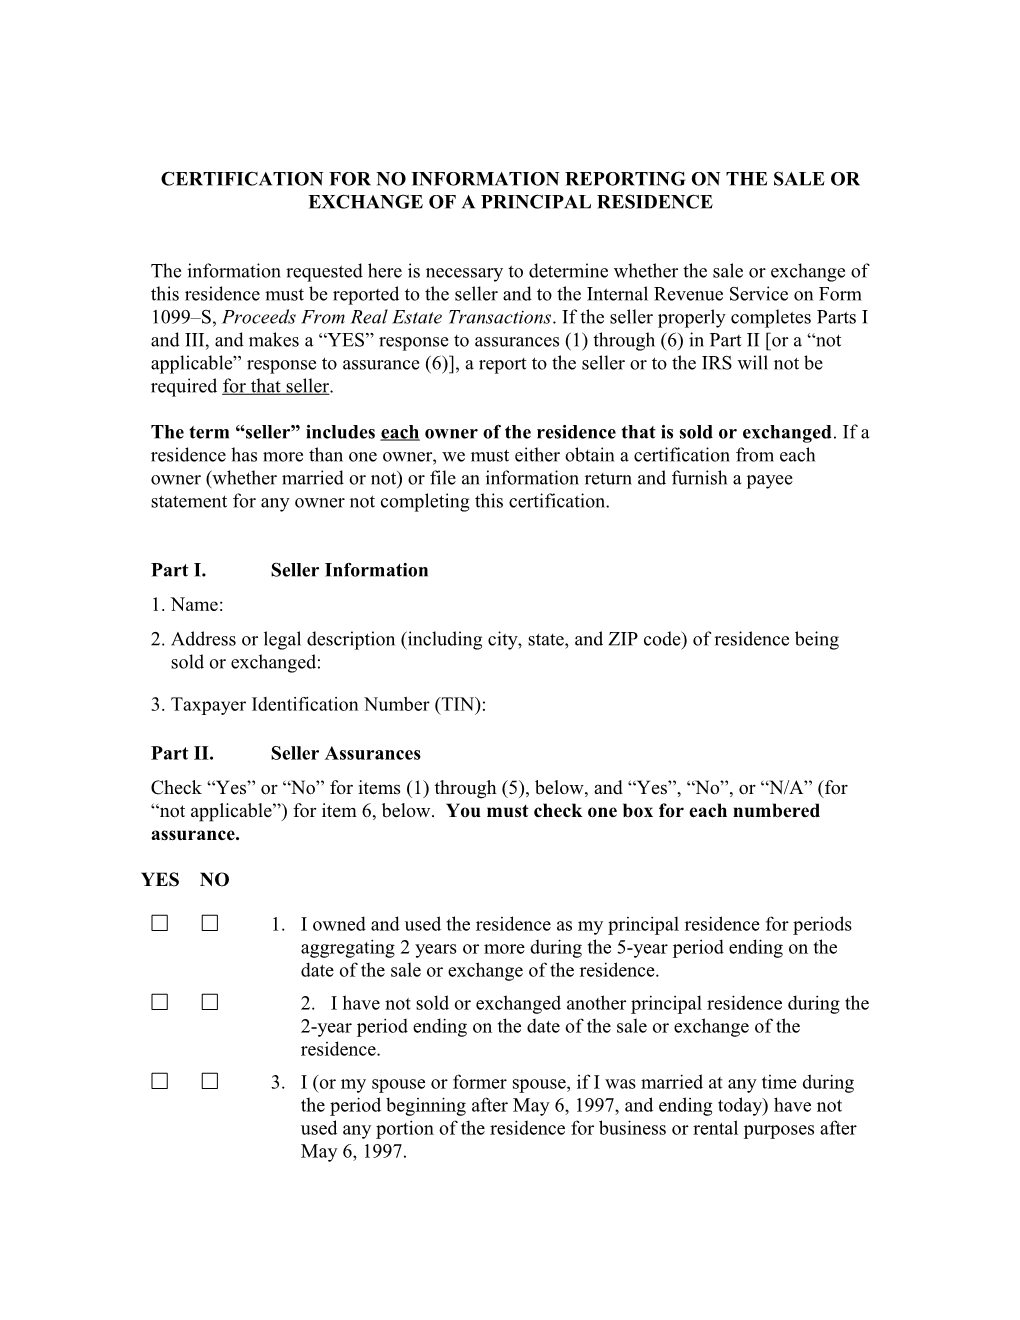 Certification for No Information Reporting on the Sale Or Exchange of a Principal Residence